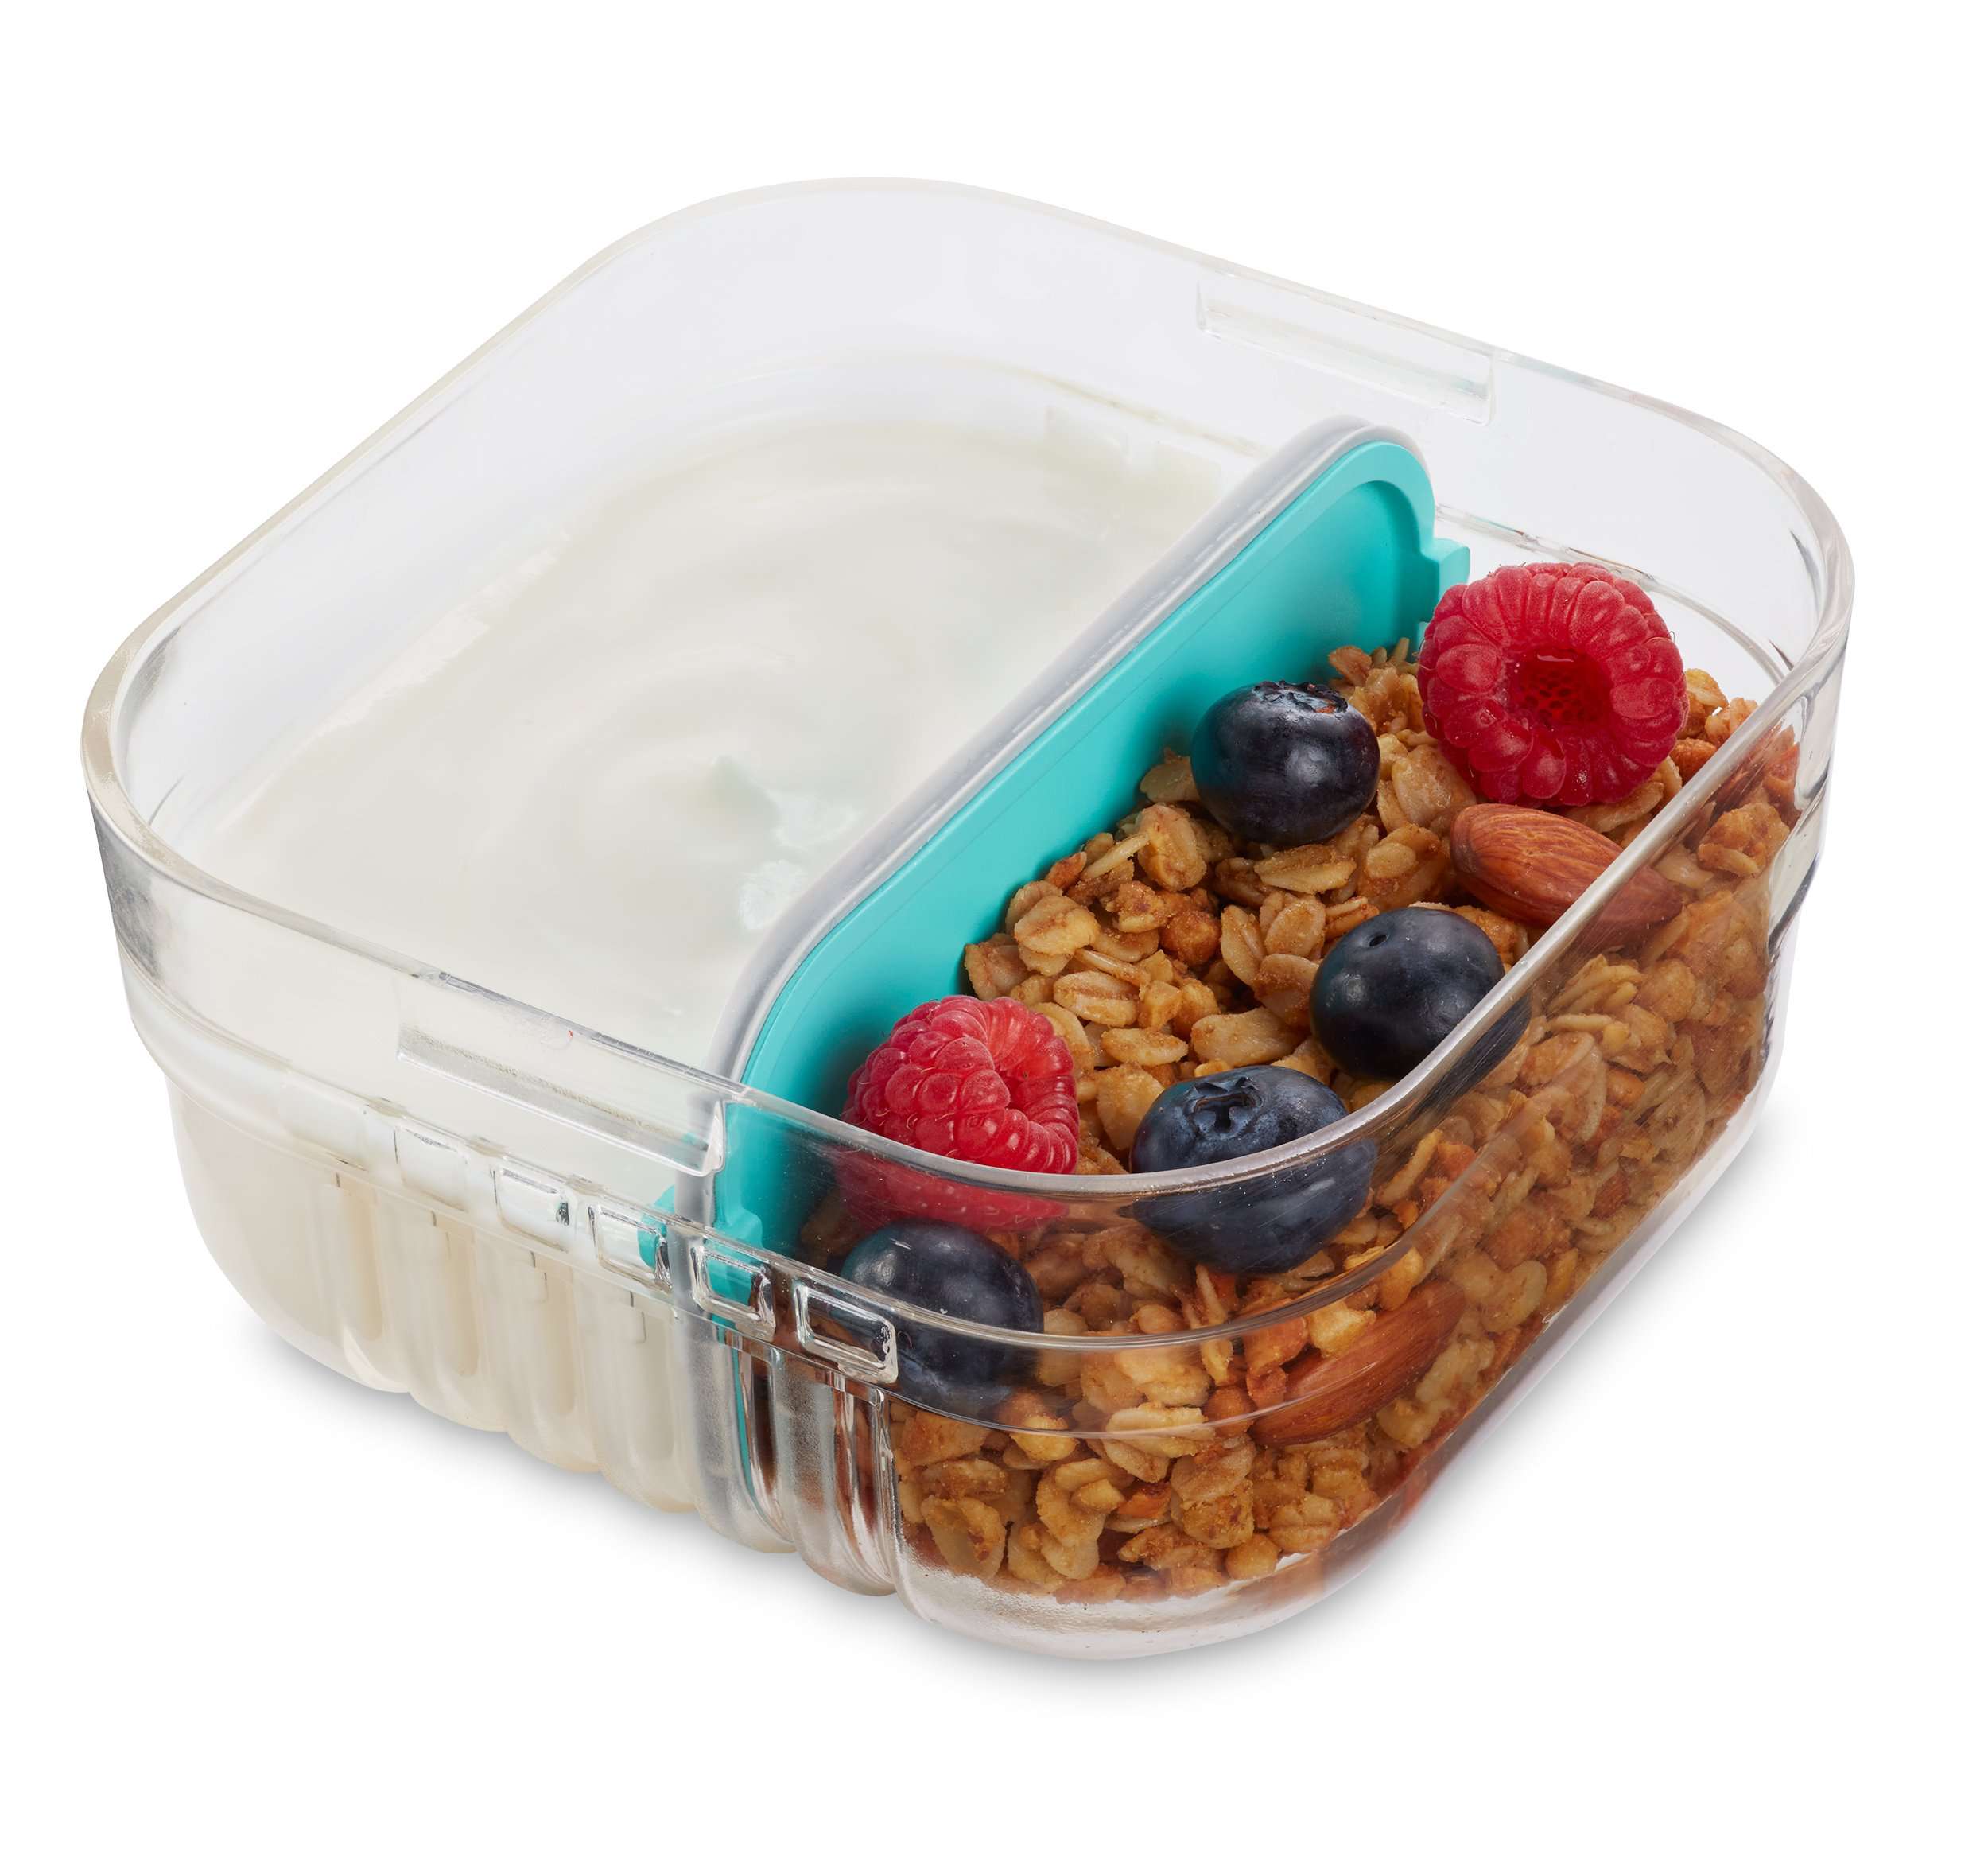 Snack Container With 4 Compartments, Divided Bento Lunch Box With